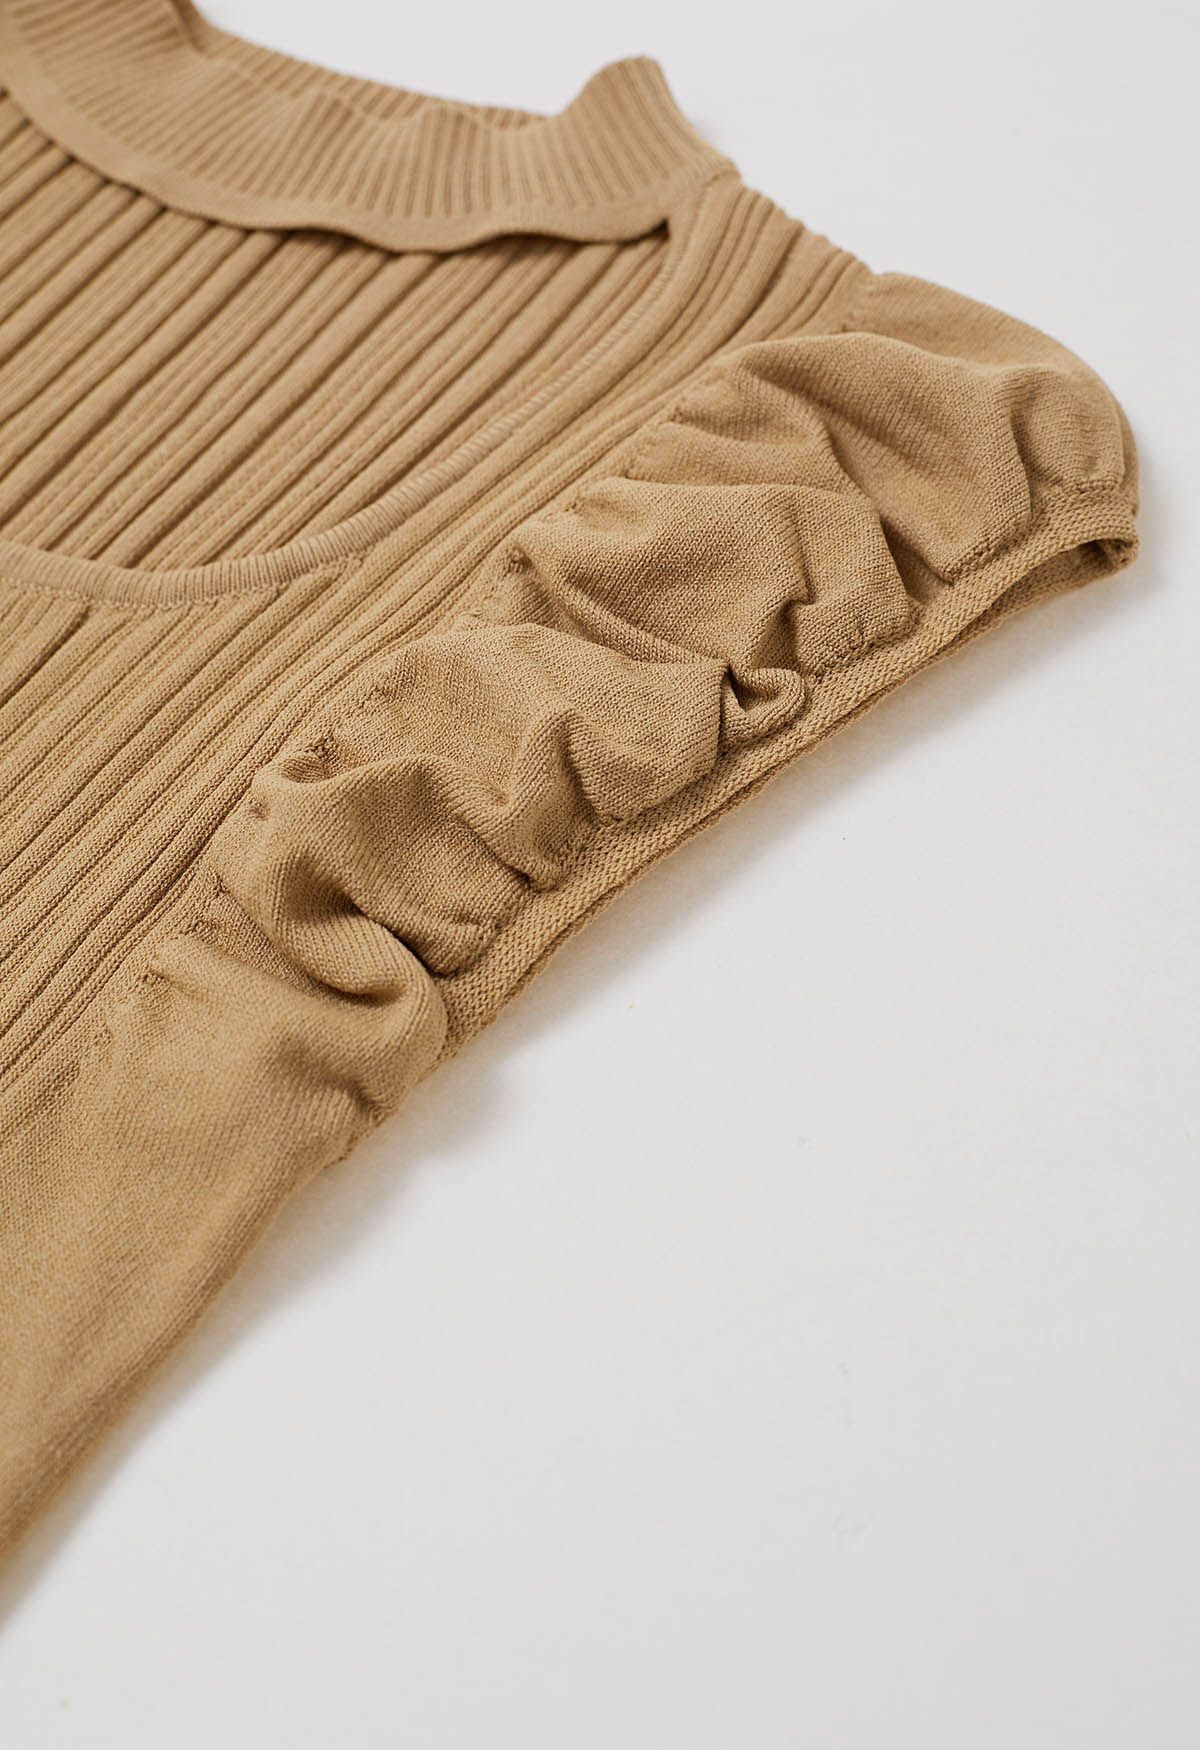 Choker Neck Ruched Cap Sleeves Knit Top in Tan